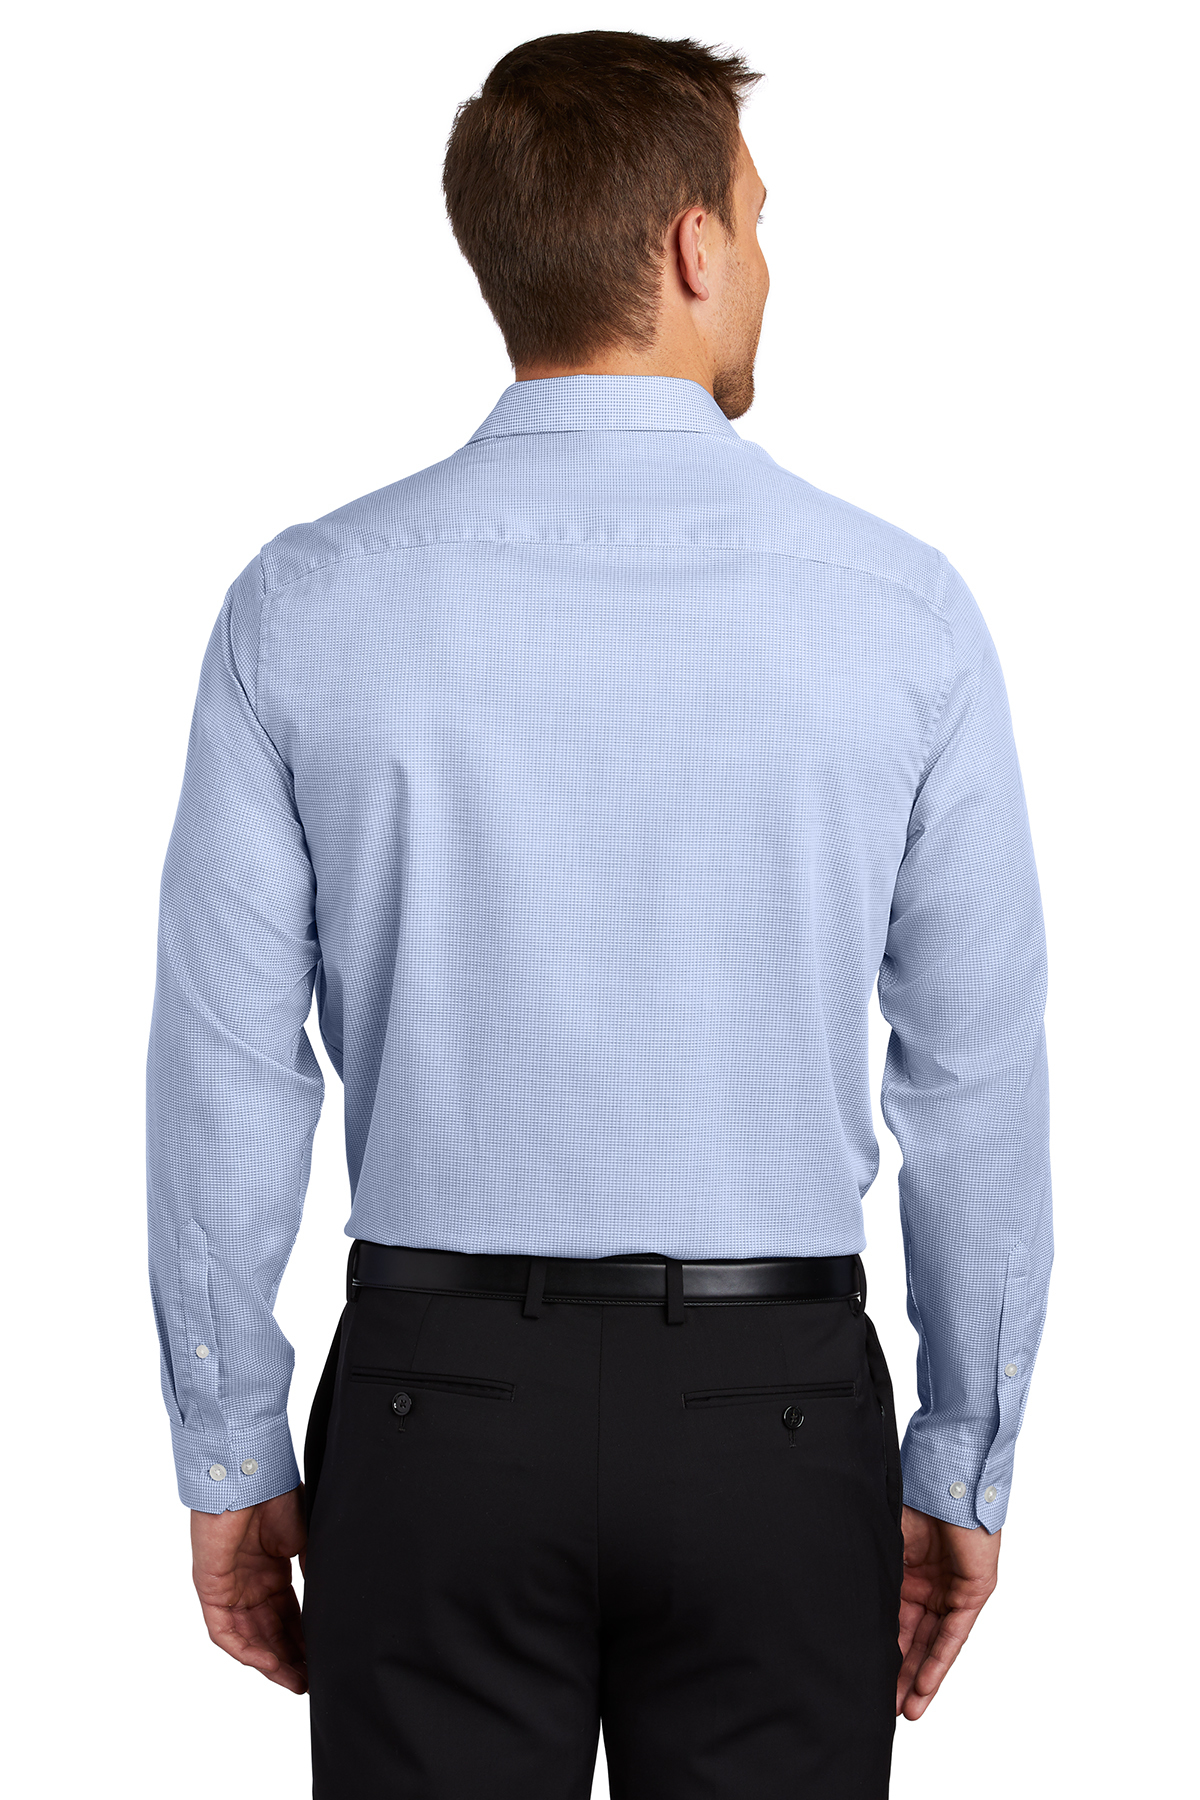 Care Pincheck | Product | Easy Shirt Authority SanMar Port